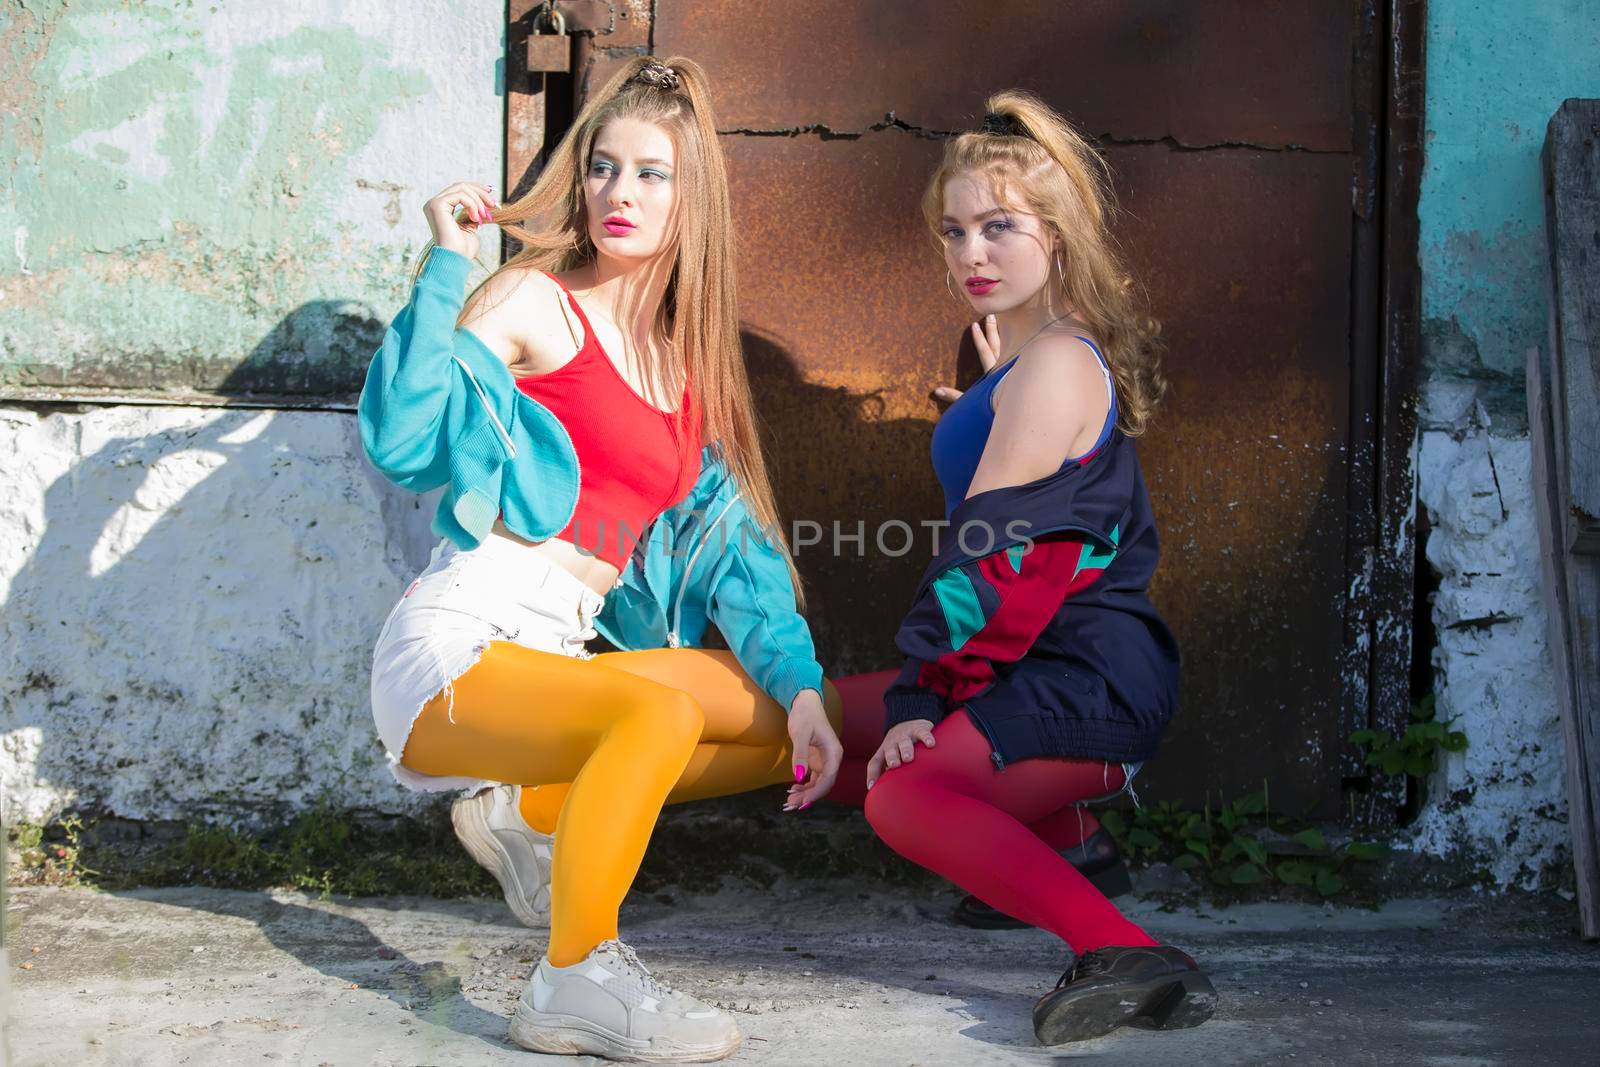 Two funny girls in bright clothes in the style of the nineties are sitting against the background of a rusty door. Russian village girls.